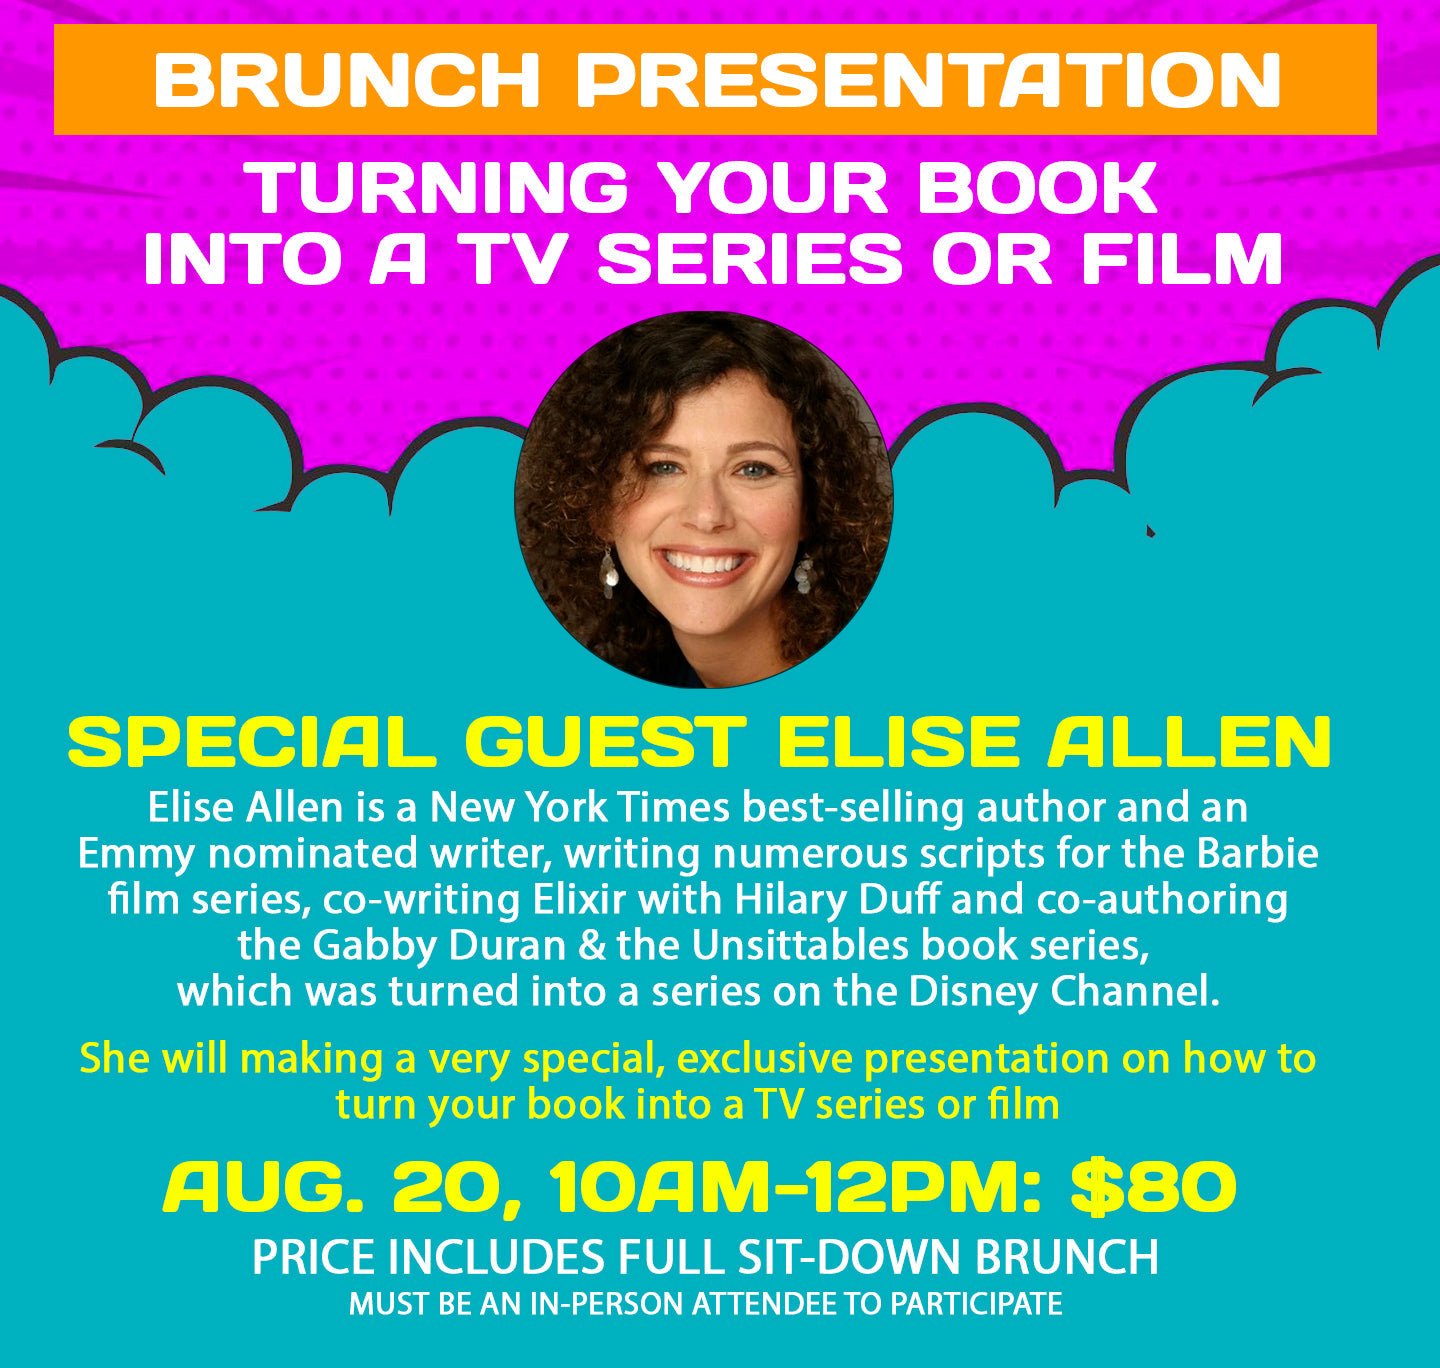 NEW! SUNDAY BRUNCH PRESENTATION: TURNING YOUR BOOK INTO A TV SERIES OR FILM (VIRTUAL)